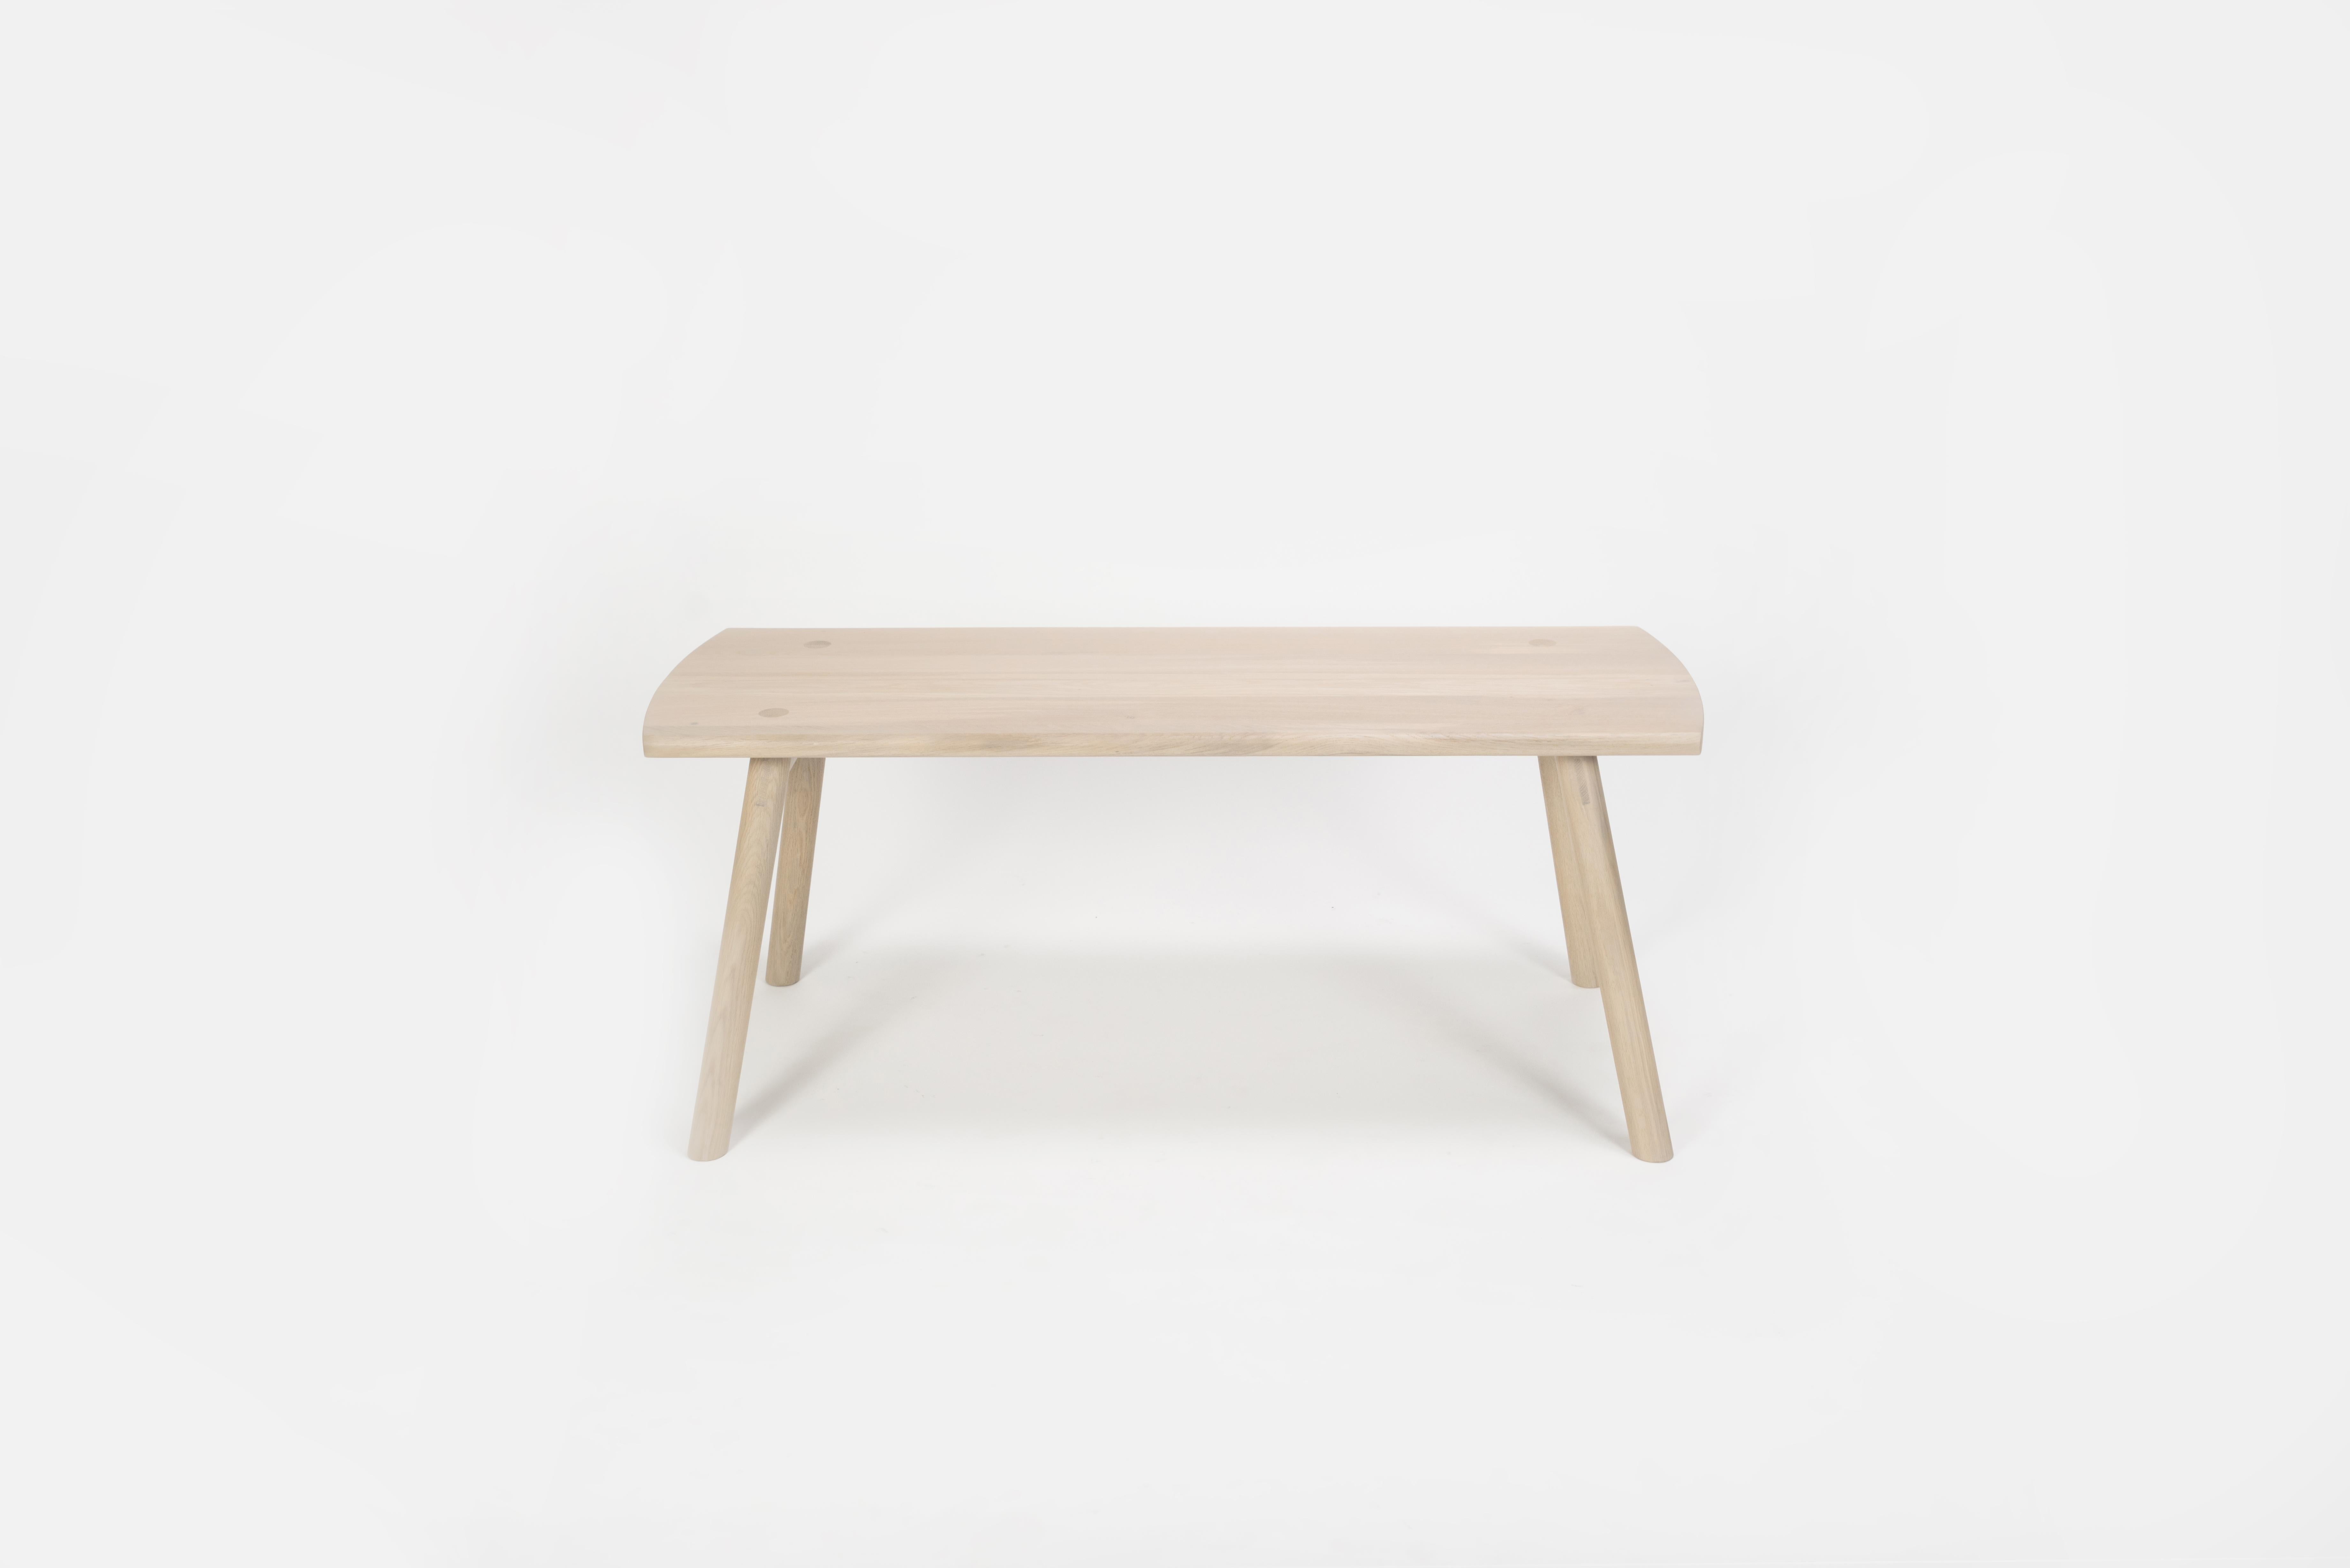 Sun at Six is a contemporary furniture design studio that works with traditional Chinese joinery masters to handcraft our pieces using traditional joinery. The Sol bench is made with traditional joinery techniques with visible exposed tenons,